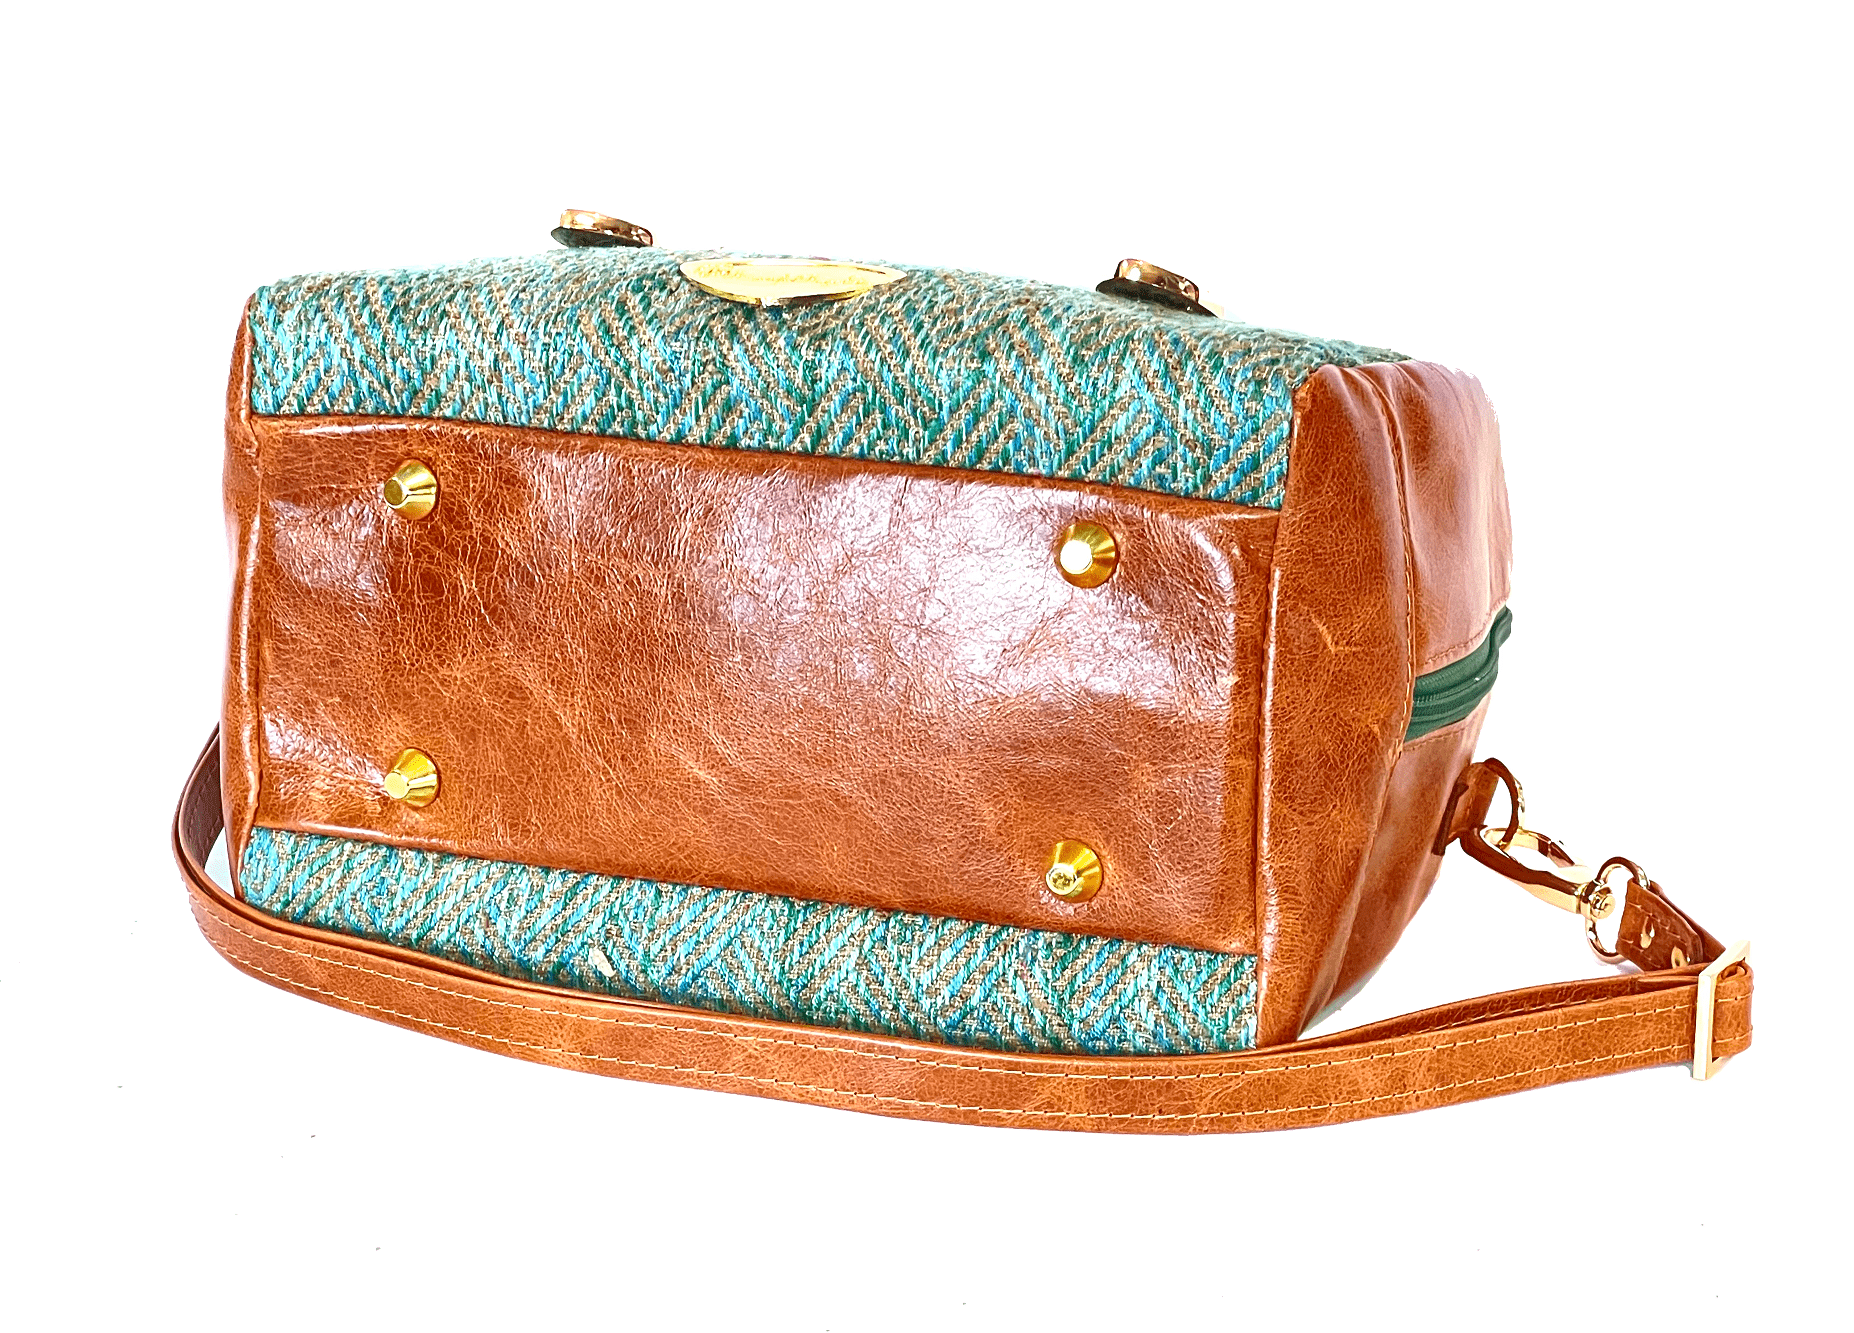 Danielle Barrel Bag Teal Tweed and Caramel Leather bottom view